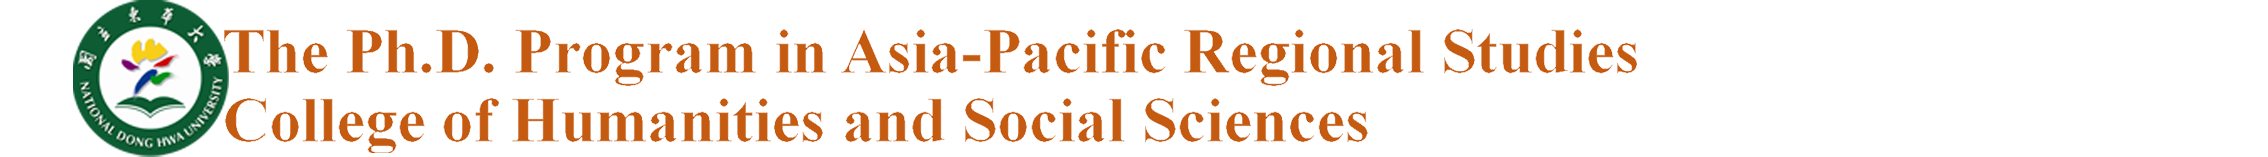 The Ph.D. Program in Asia-Pacific Regional Studies, College of Humanities and Social Sciences